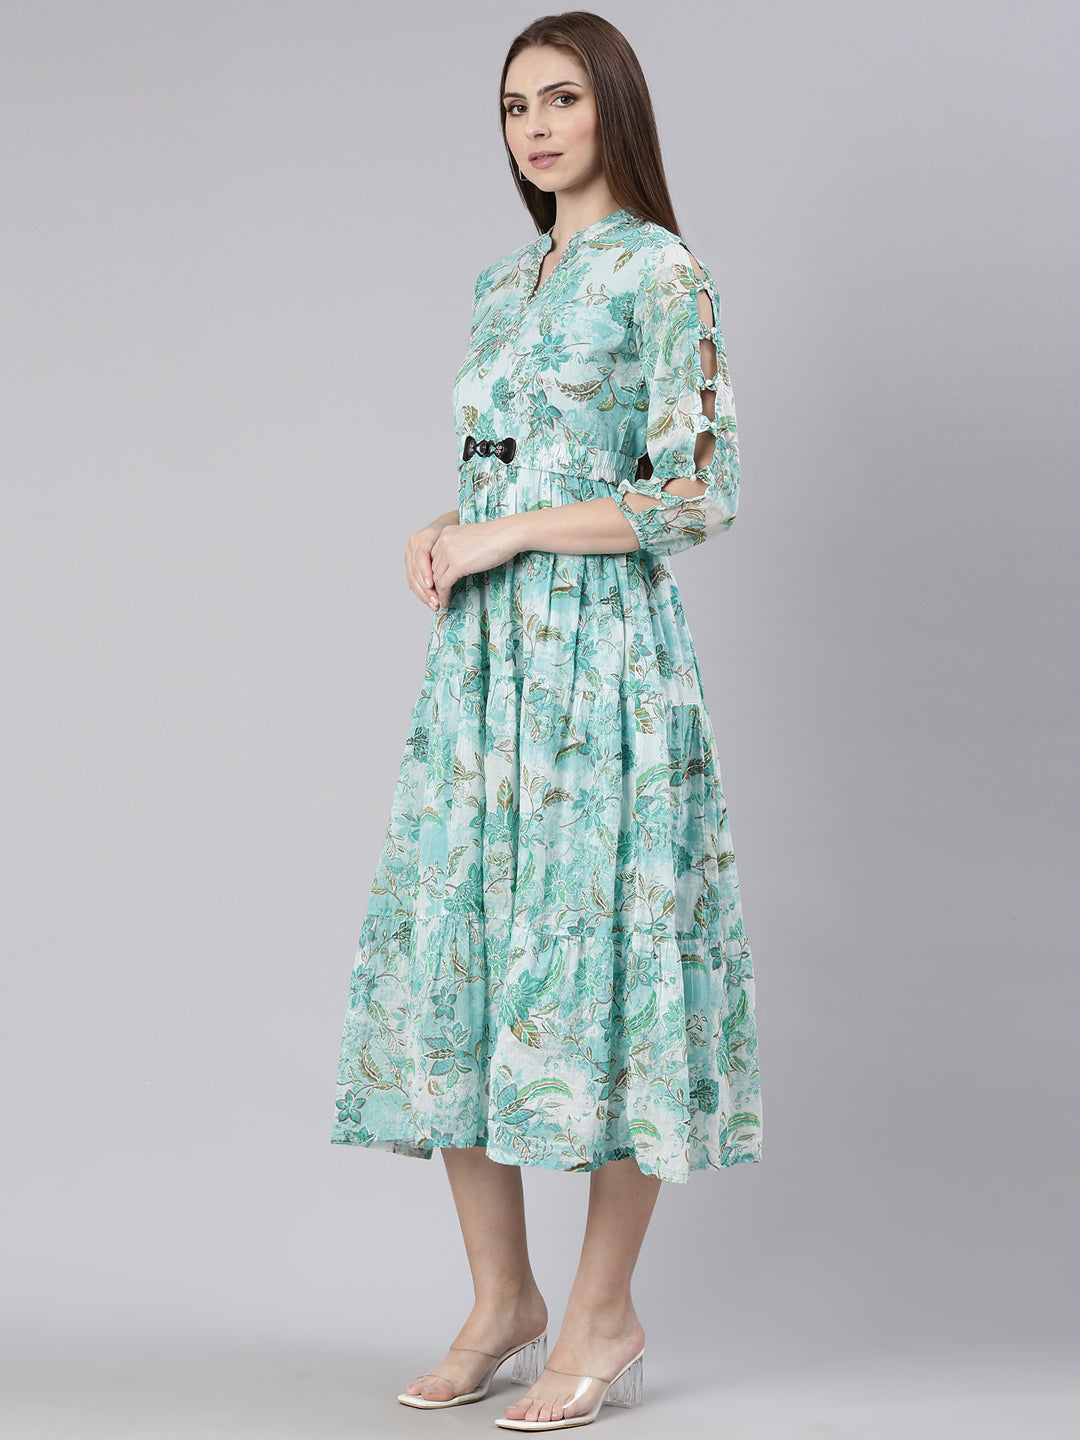 Women Turquoise Blue Floral Fit and Flare Dress